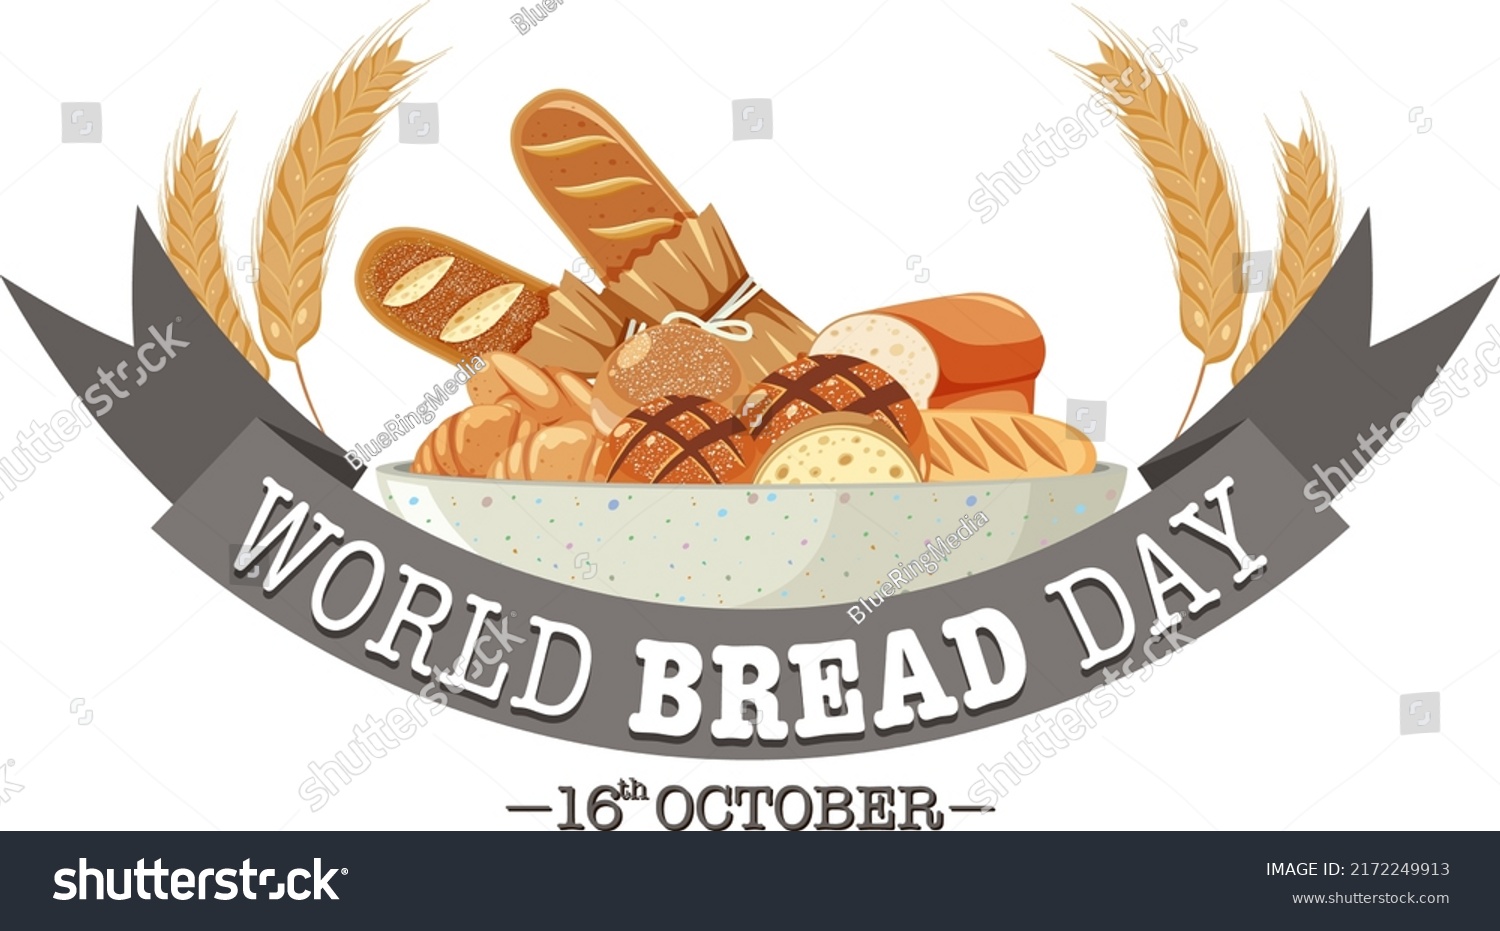 World Bread Day Poster Template Illustration Stock Vector (Royalty Free